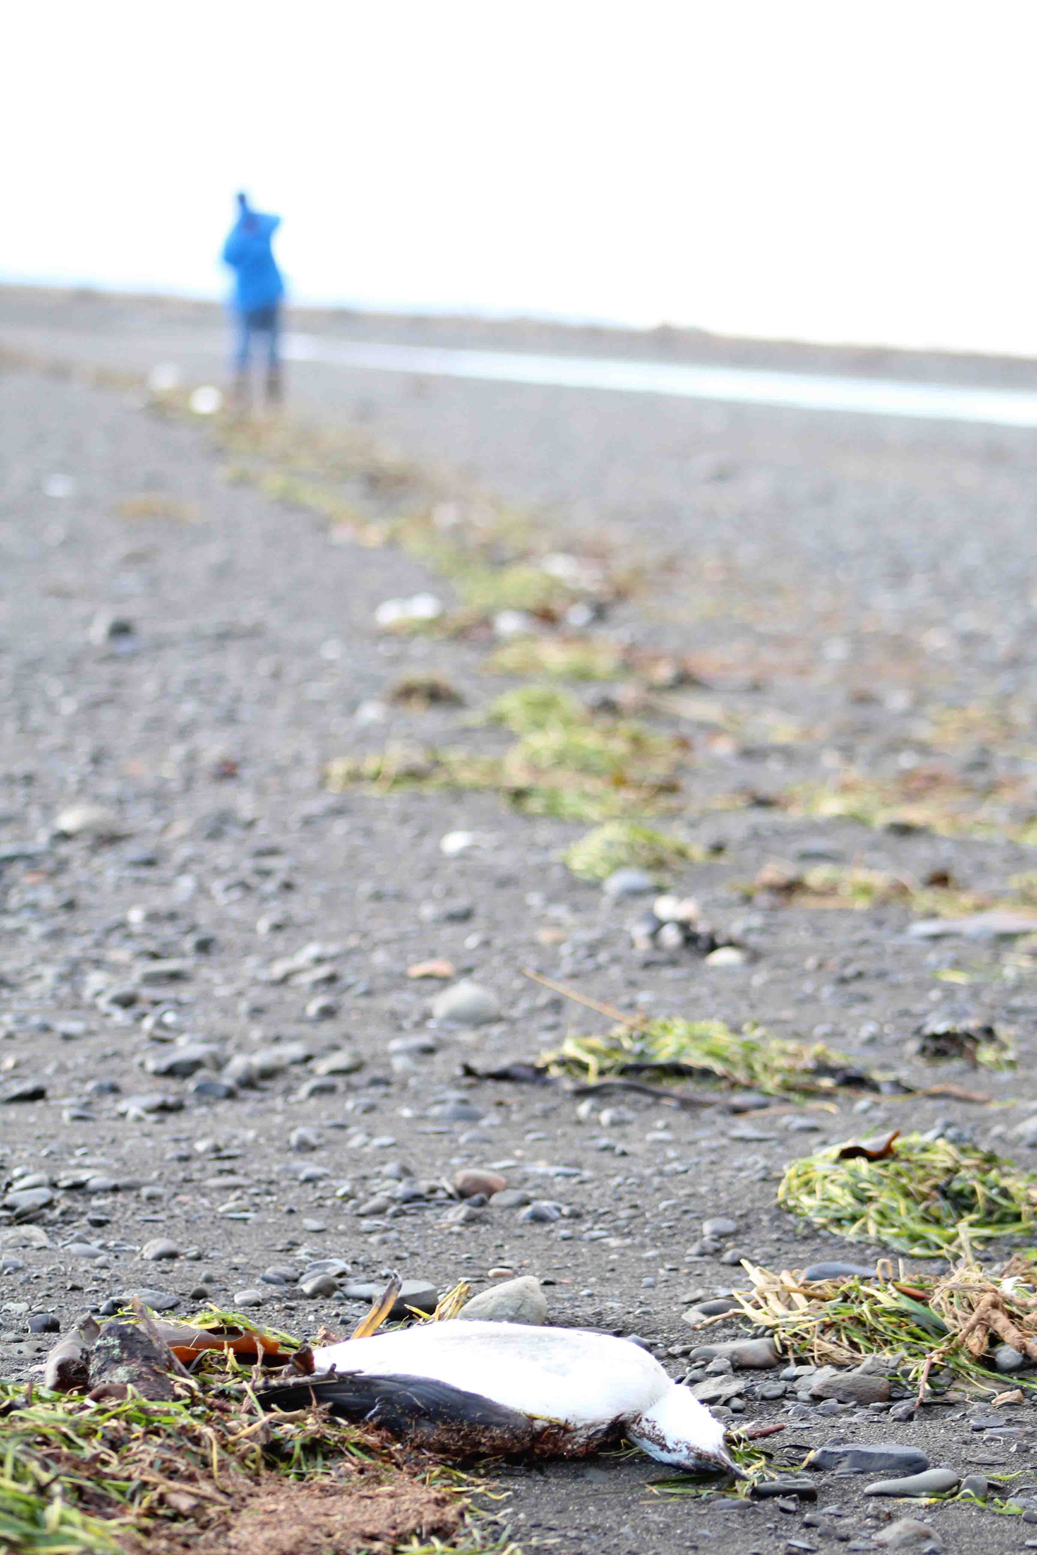 Homer News reporters counted 126 dead murres washed up on the trail by Mud Bay on Dec. 31. Biologists don’t know what is causing the murres to die in such huge numbers.-photo by Anna Frost, Homer News